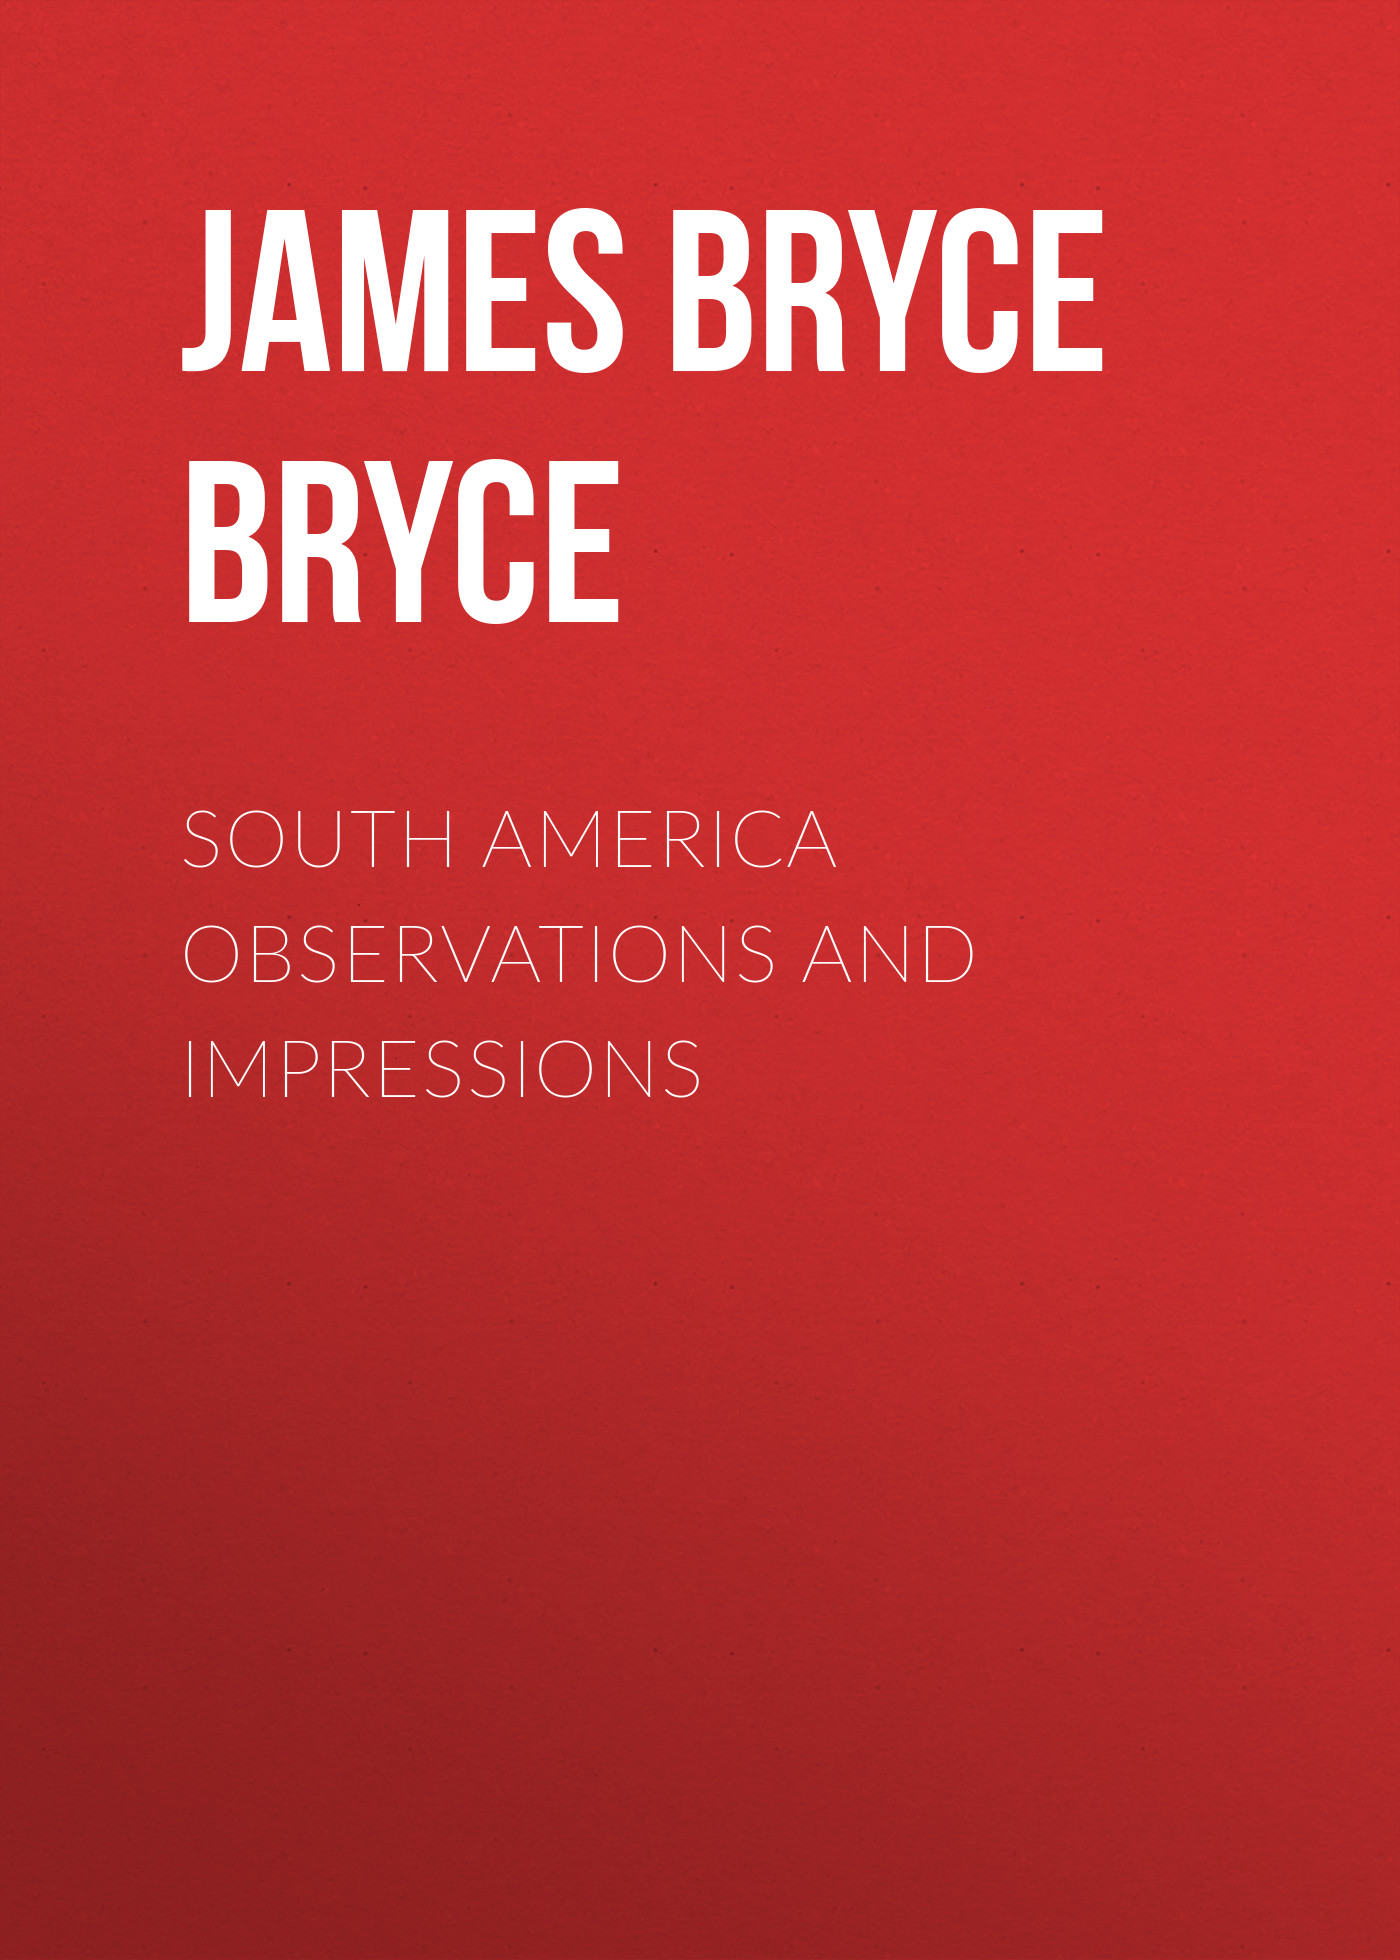 South America Observations and Impressions